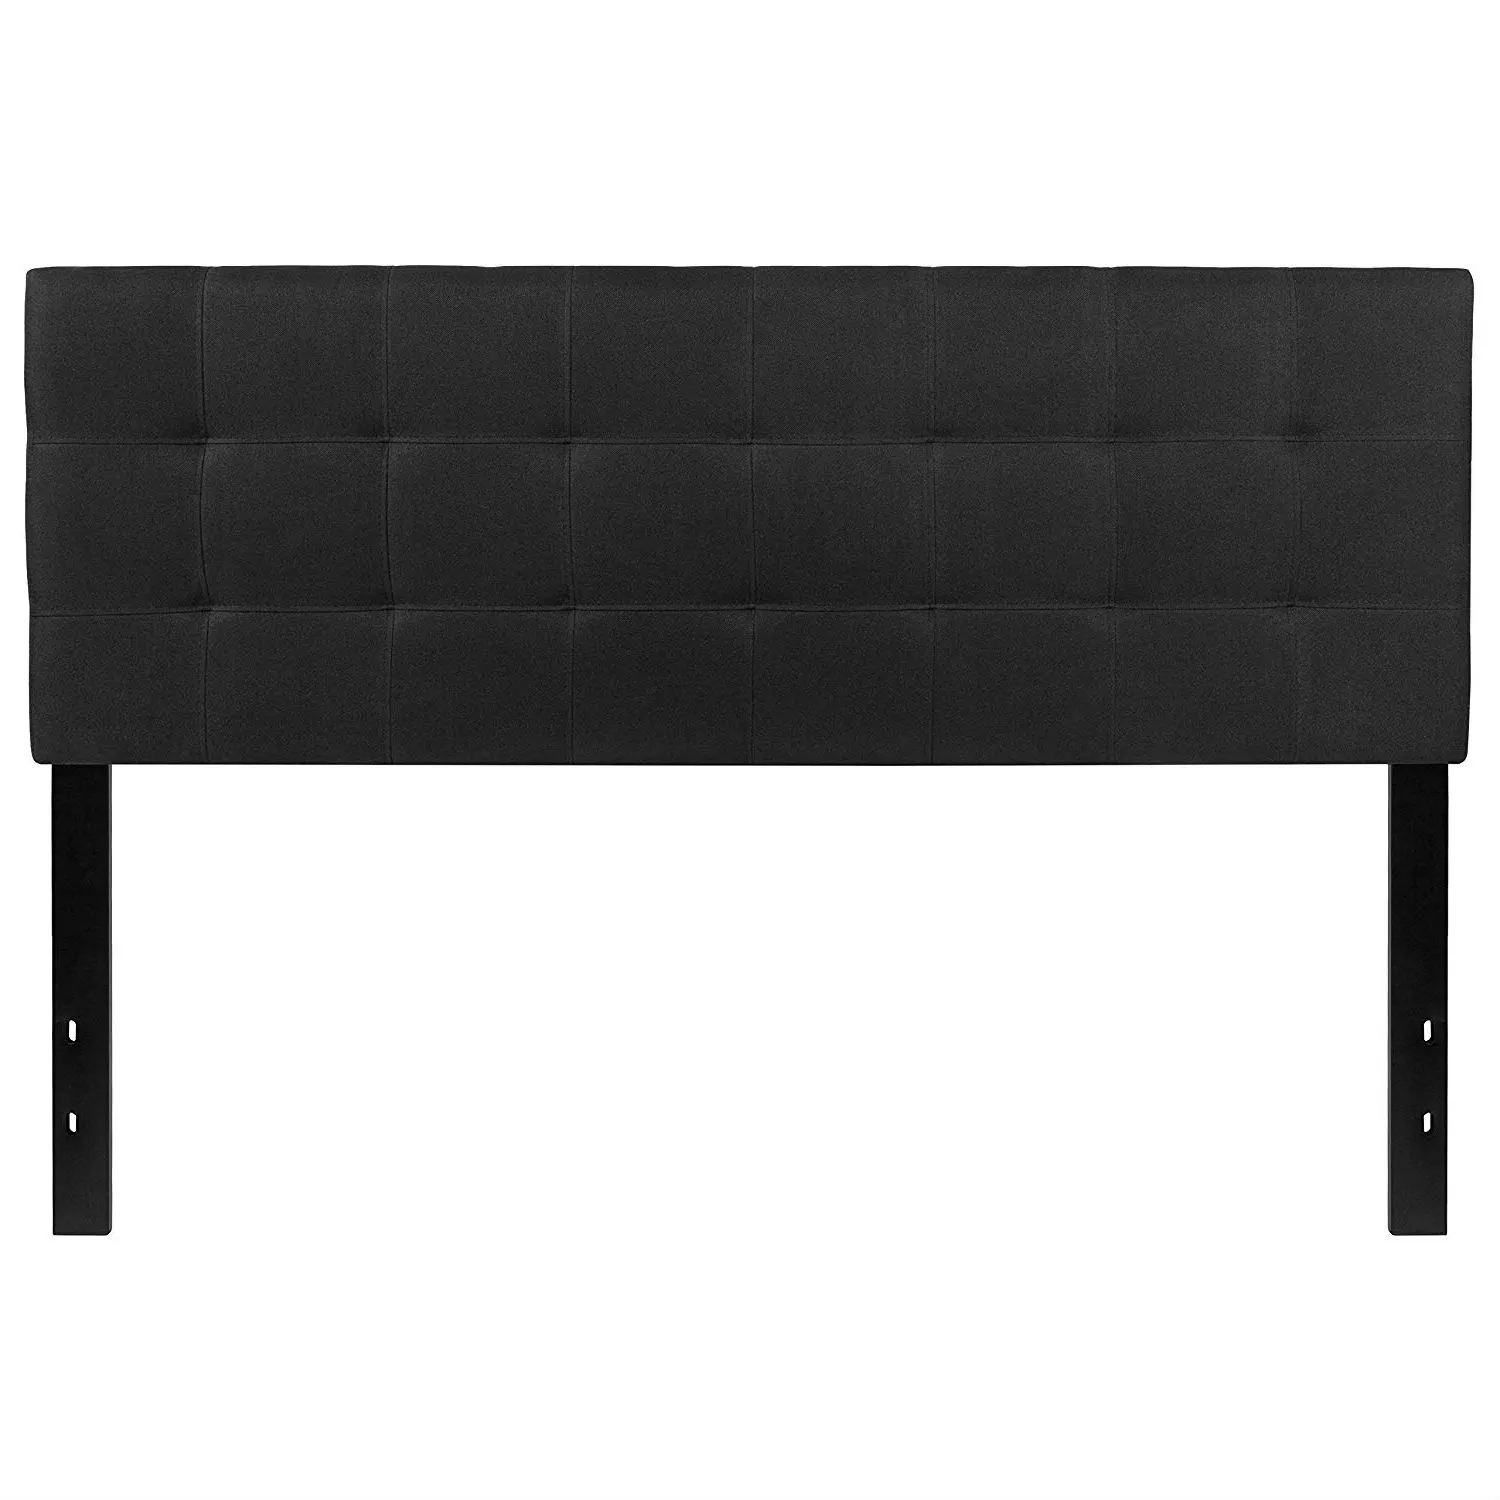 Hivvago Queen size Modern Black Fabric Upholstered Panel Headboard